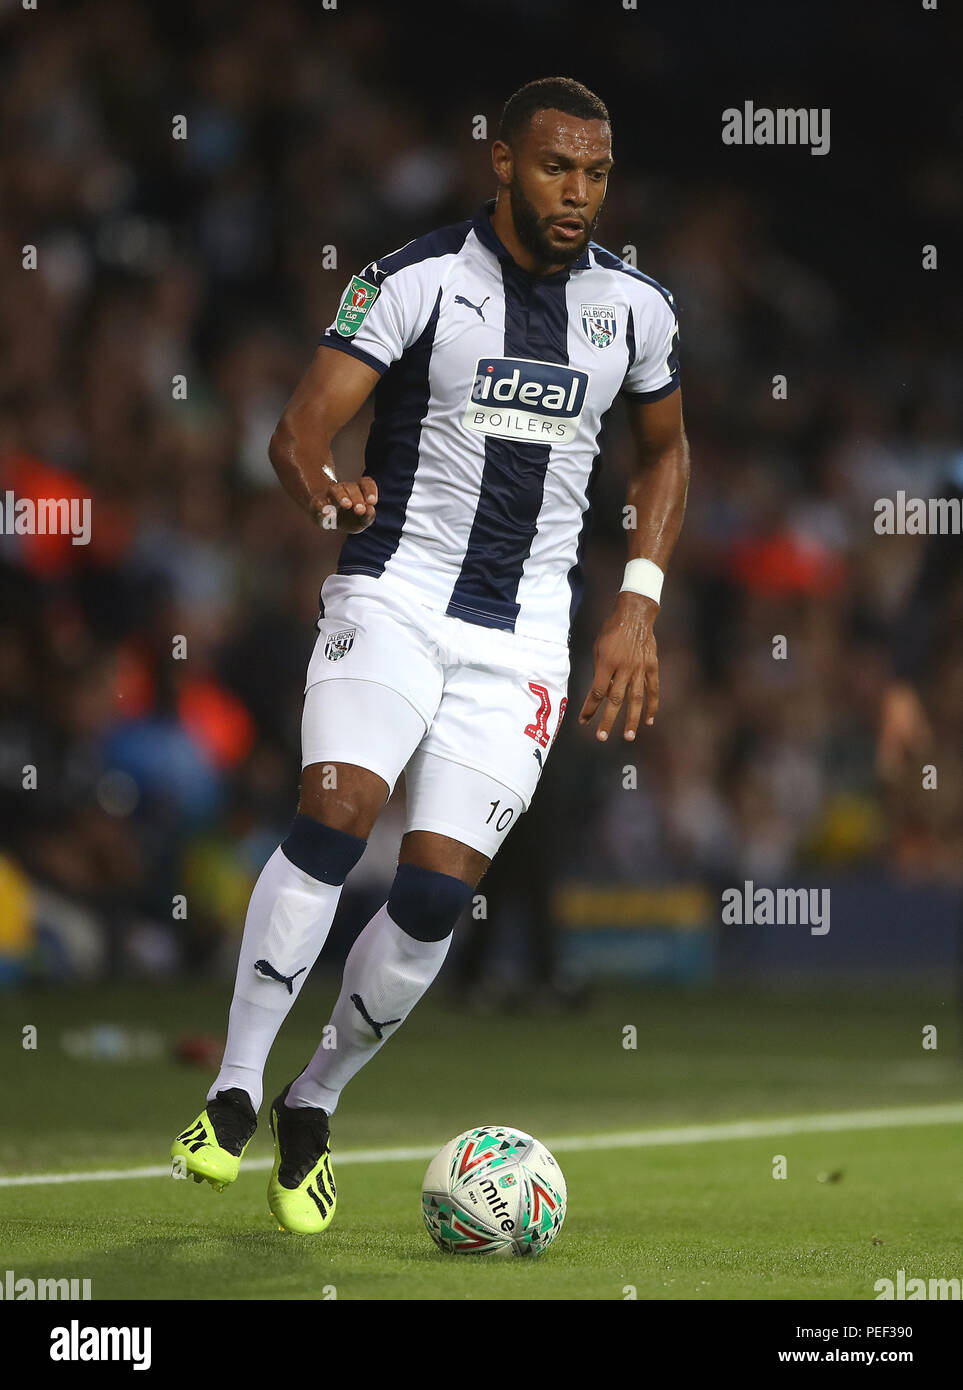 West Bromwich Albion's Matt Phillips during the Carabao Cup, First Round match at The Hawthorns, West Bromwich. PRESS ASSOCIATION Photo. Picture date: Tuesday August 14, 2018. See PA story SOCCER West Brom. Photo credit should read: Nick Potts/PA Wire. RESTRICTIONS: No use with unauthorised audio, video, data, fixture lists, club/league logos or 'live' services. Online in-match use limited to 120 images, no video emulation. No use in betting, games or single club/league/player publications. Stock Photo